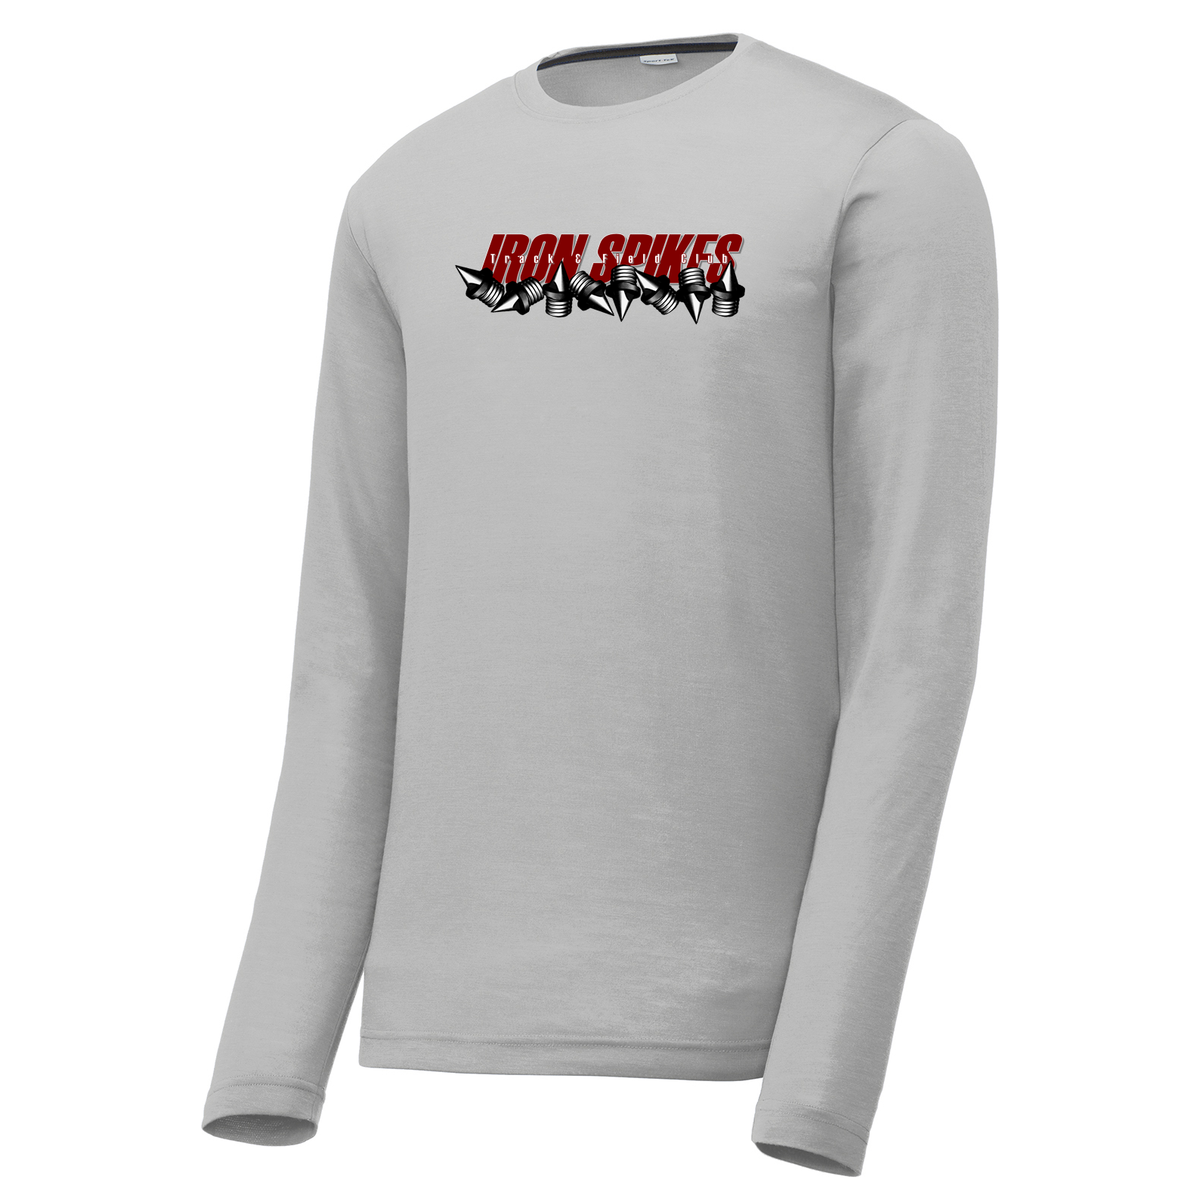 Iron Spikes Track & Field Long Sleeve CottonTouch Performance Shirt